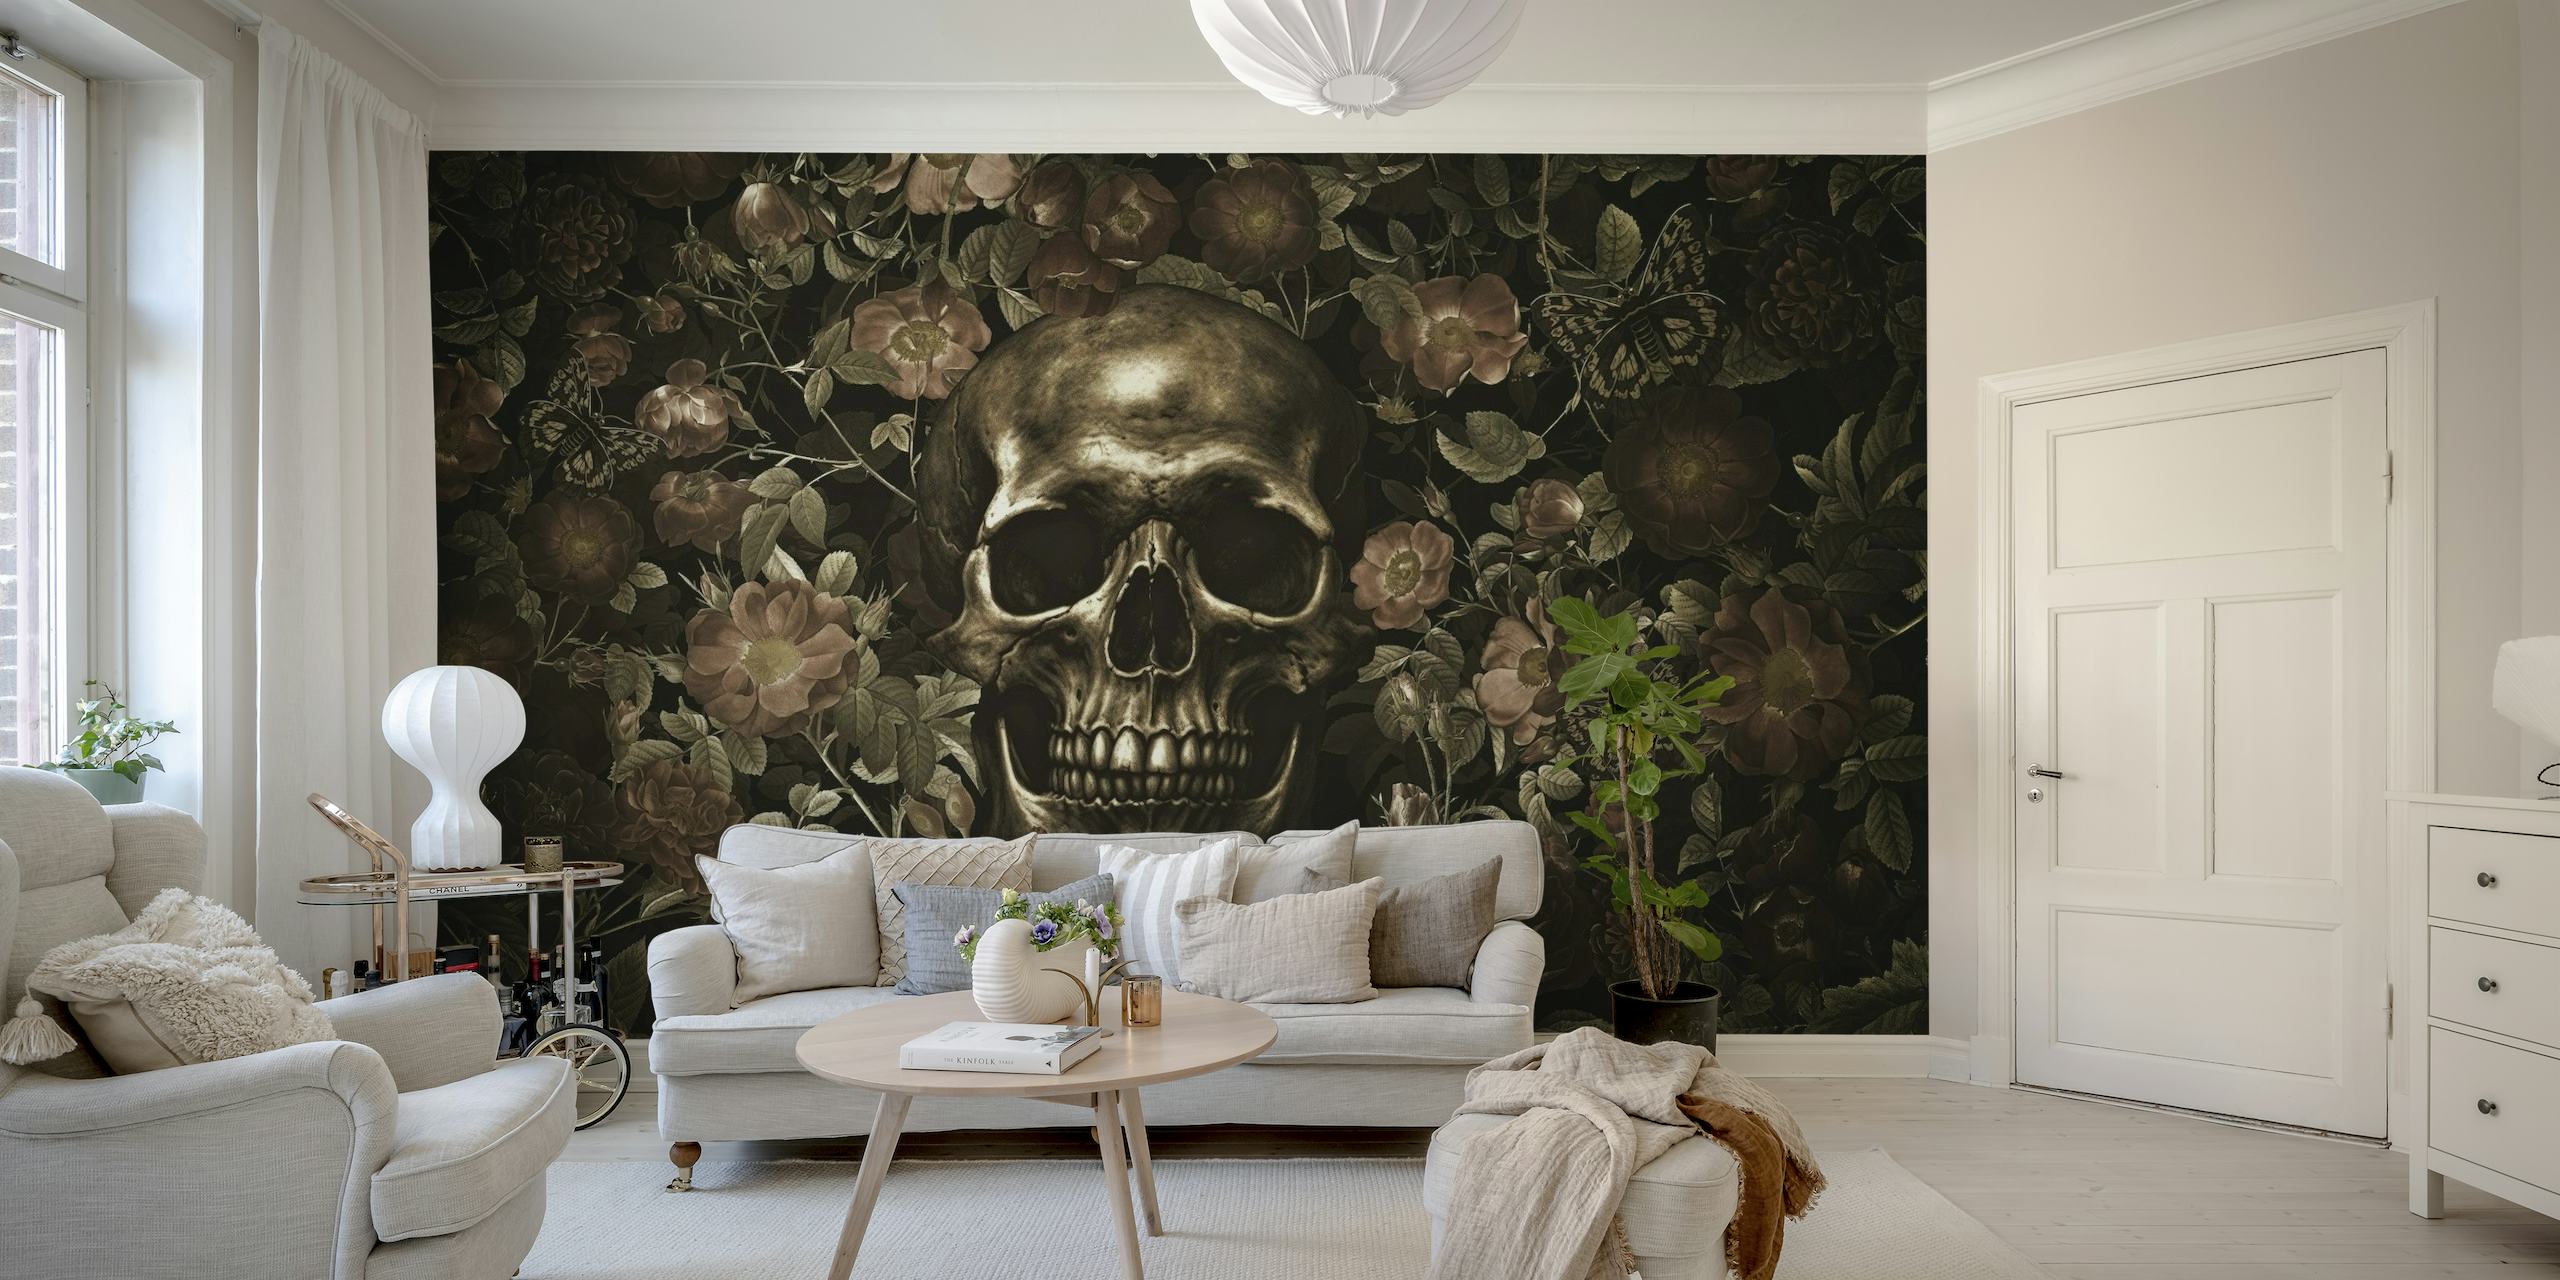 A gothic-inspired wall mural featuring a golden skull surrounded by dark blooming roses